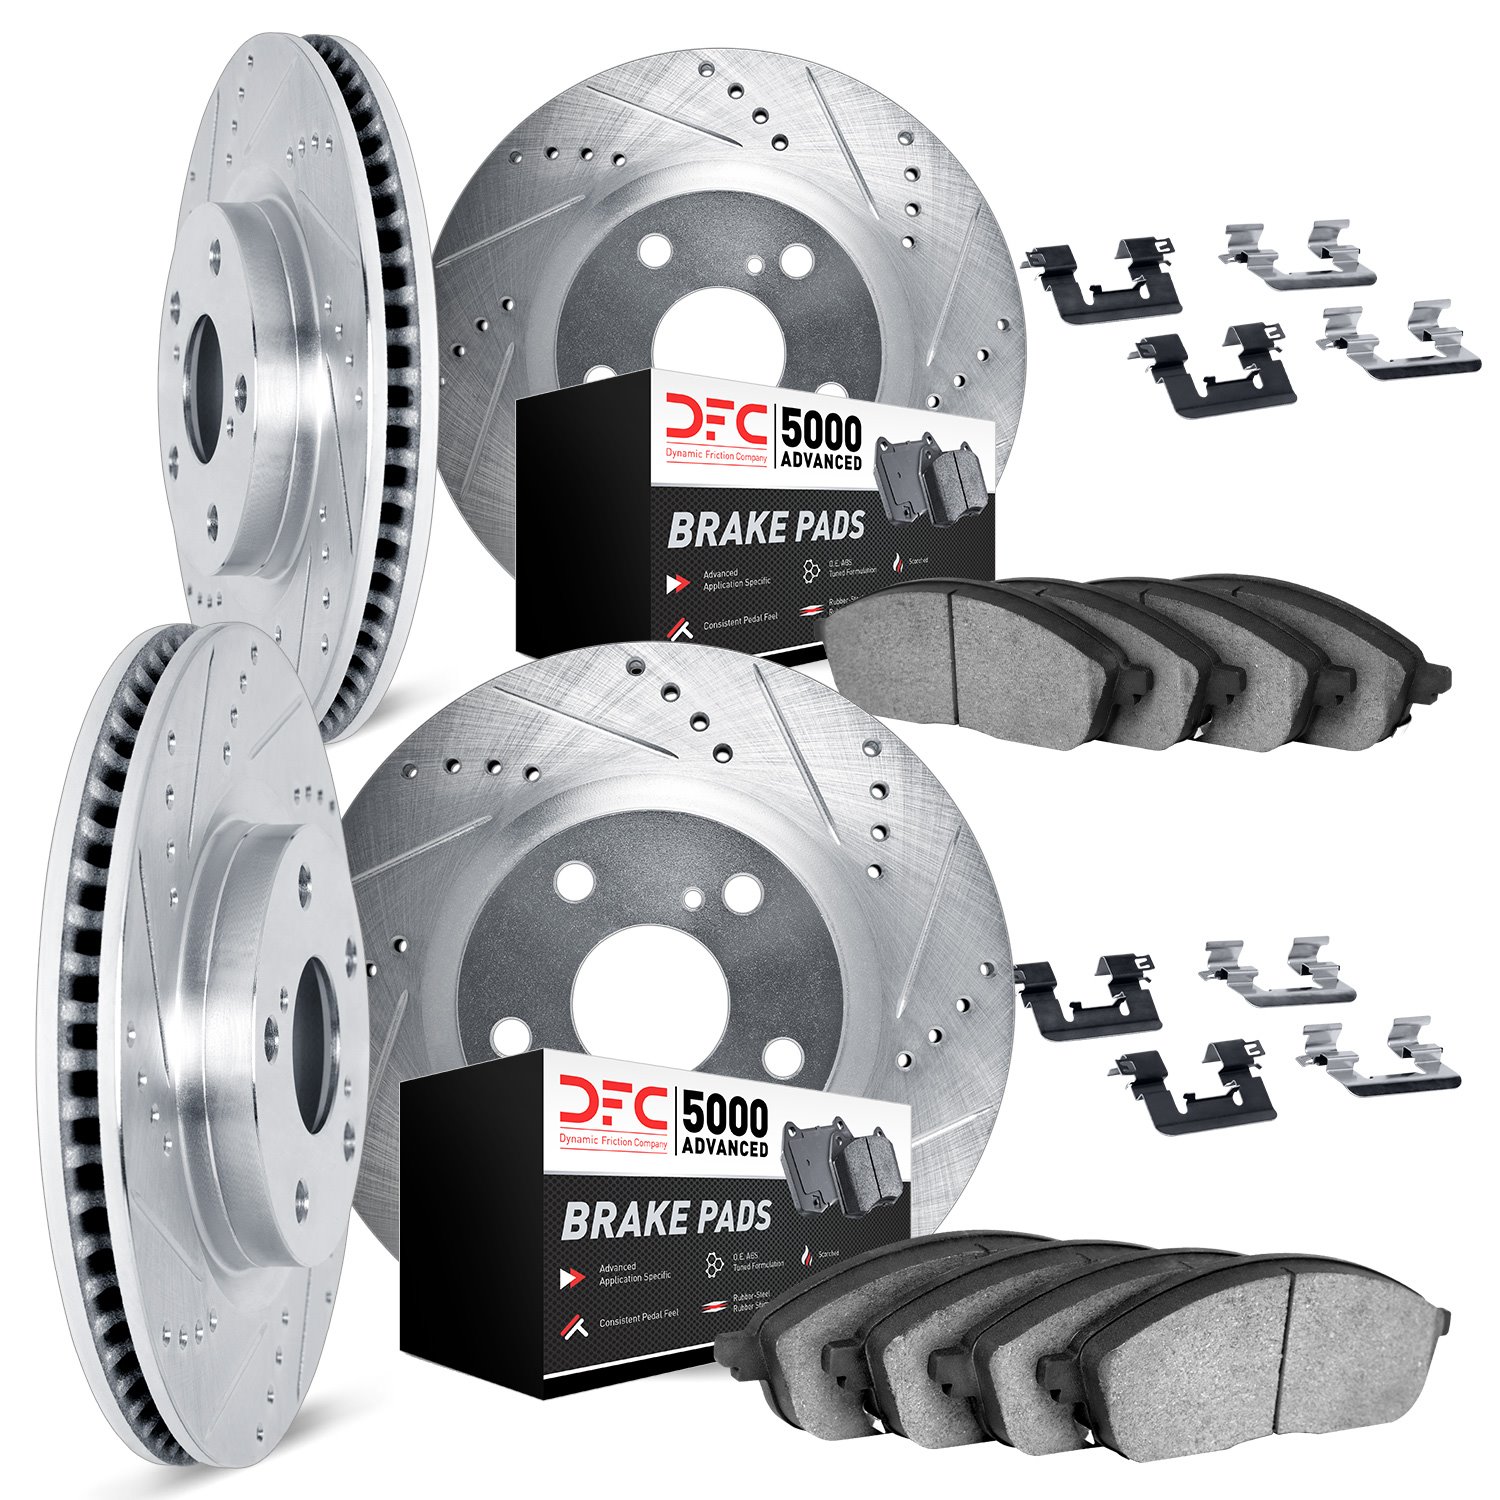 7514-67121 Drilled/Slotted Brake Rotors w/5000 Advanced Brake Pads Kit & Hardware [Silver], Fits Select Infiniti/Nissan, Positio